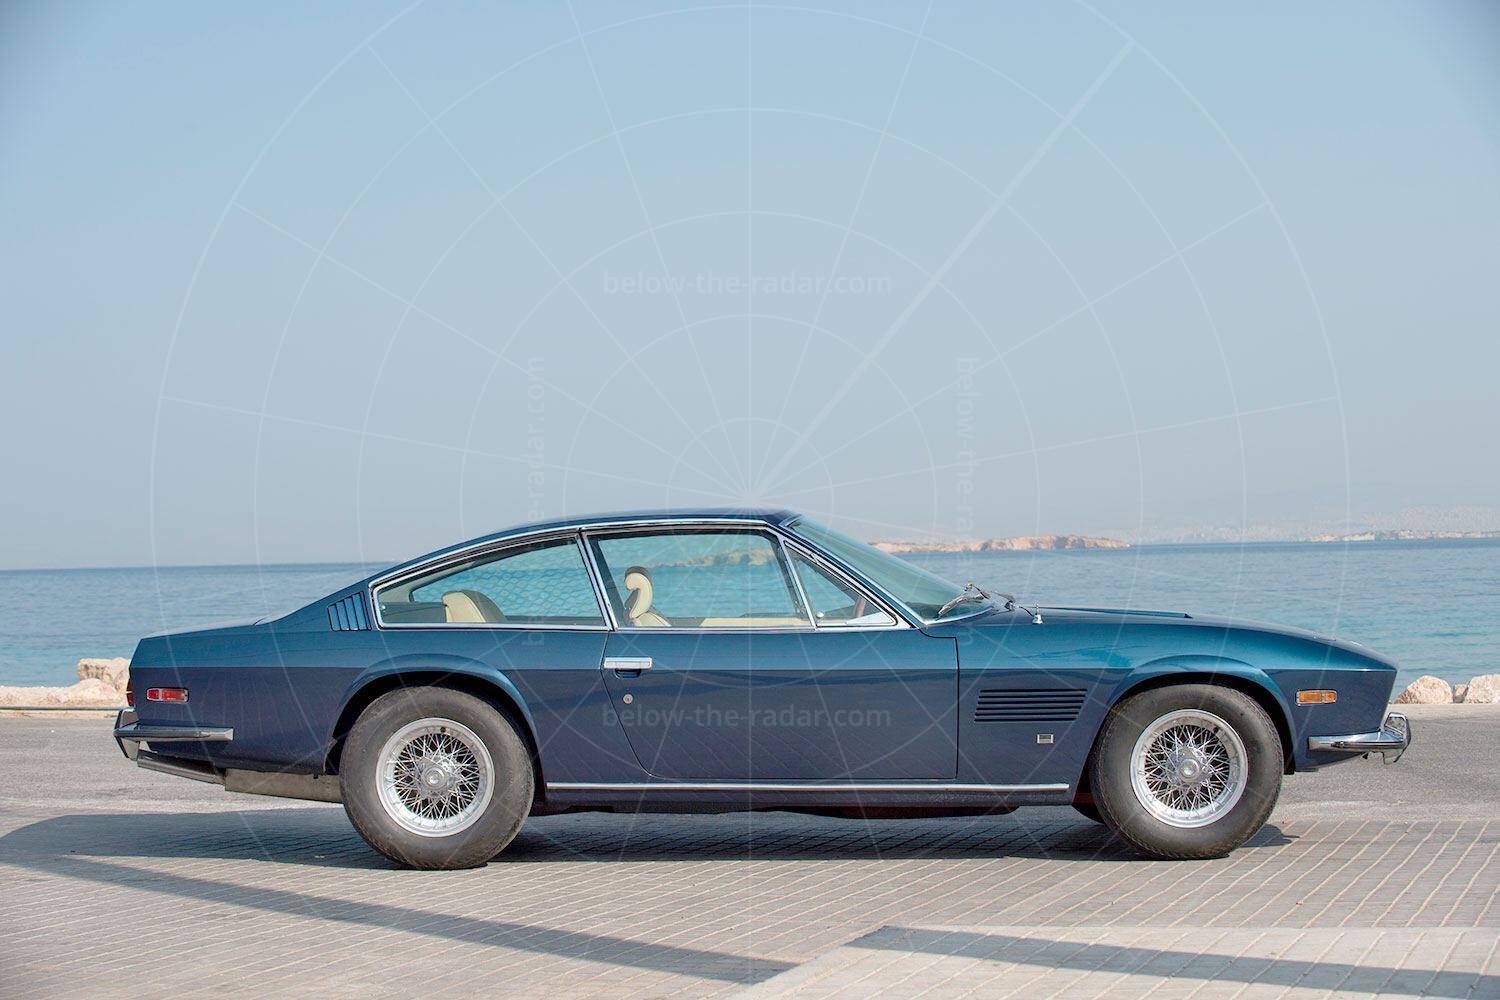 The Monteverdi High Speed 375 L Pic: RM Sotheby's | The Monteverdi High Speed 375 L